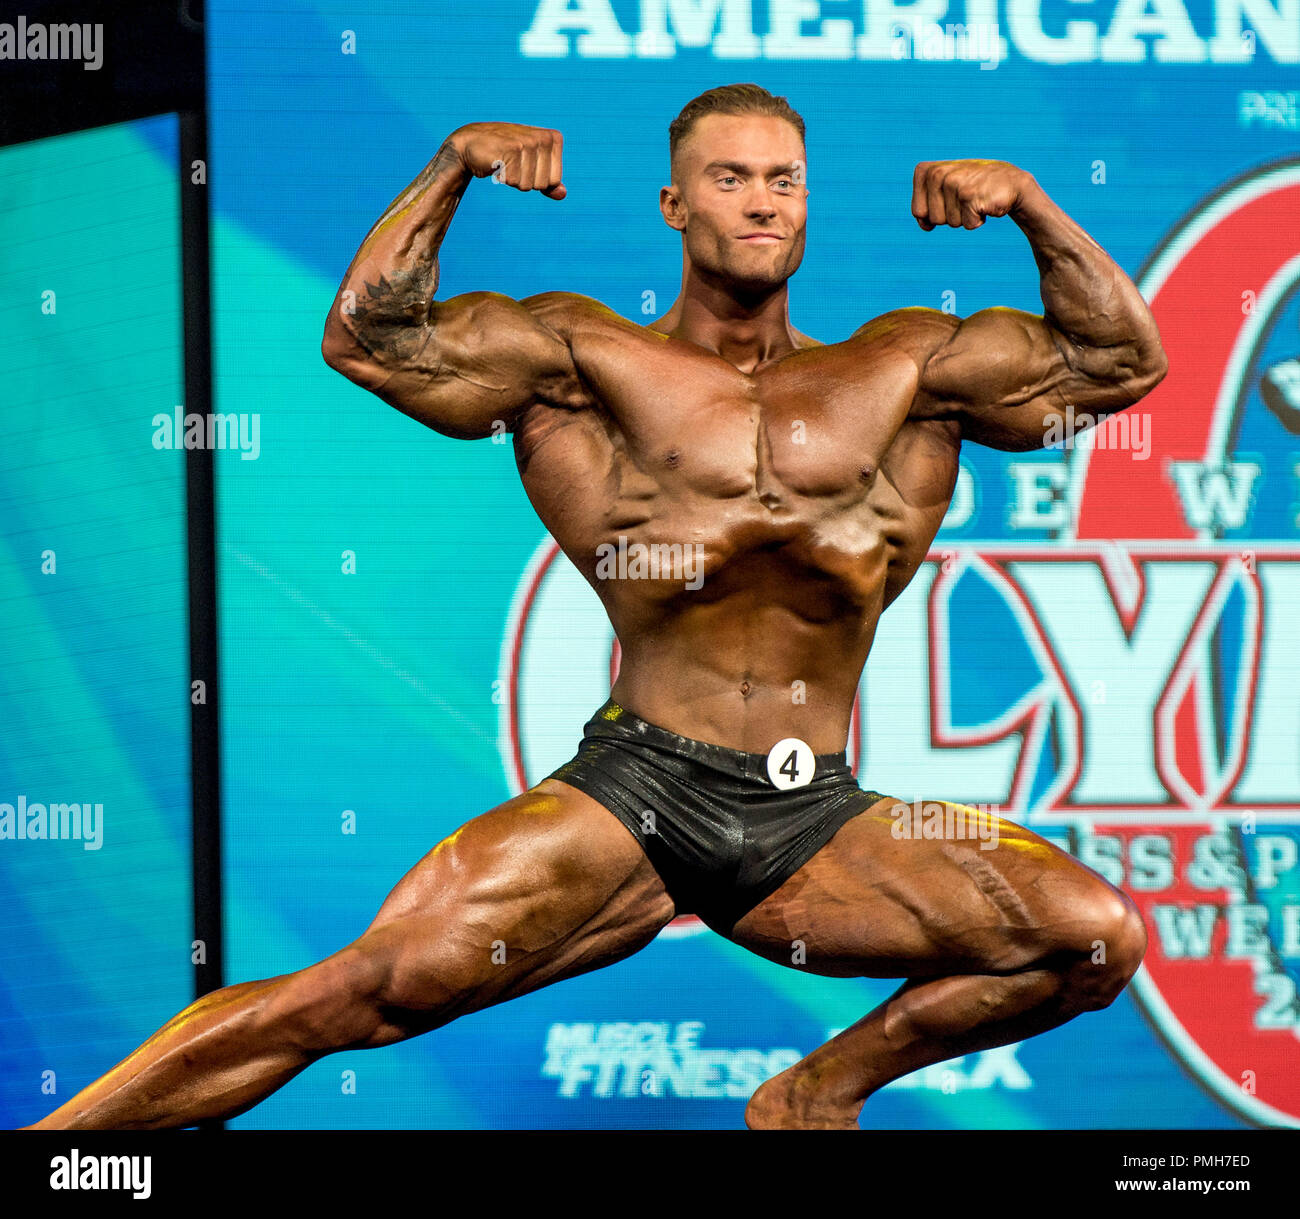 Bodybuilding World Hails Frank Zane's “Old School Aesthetic” Showing Off  'The Most Popular Pose' - EssentiallySports